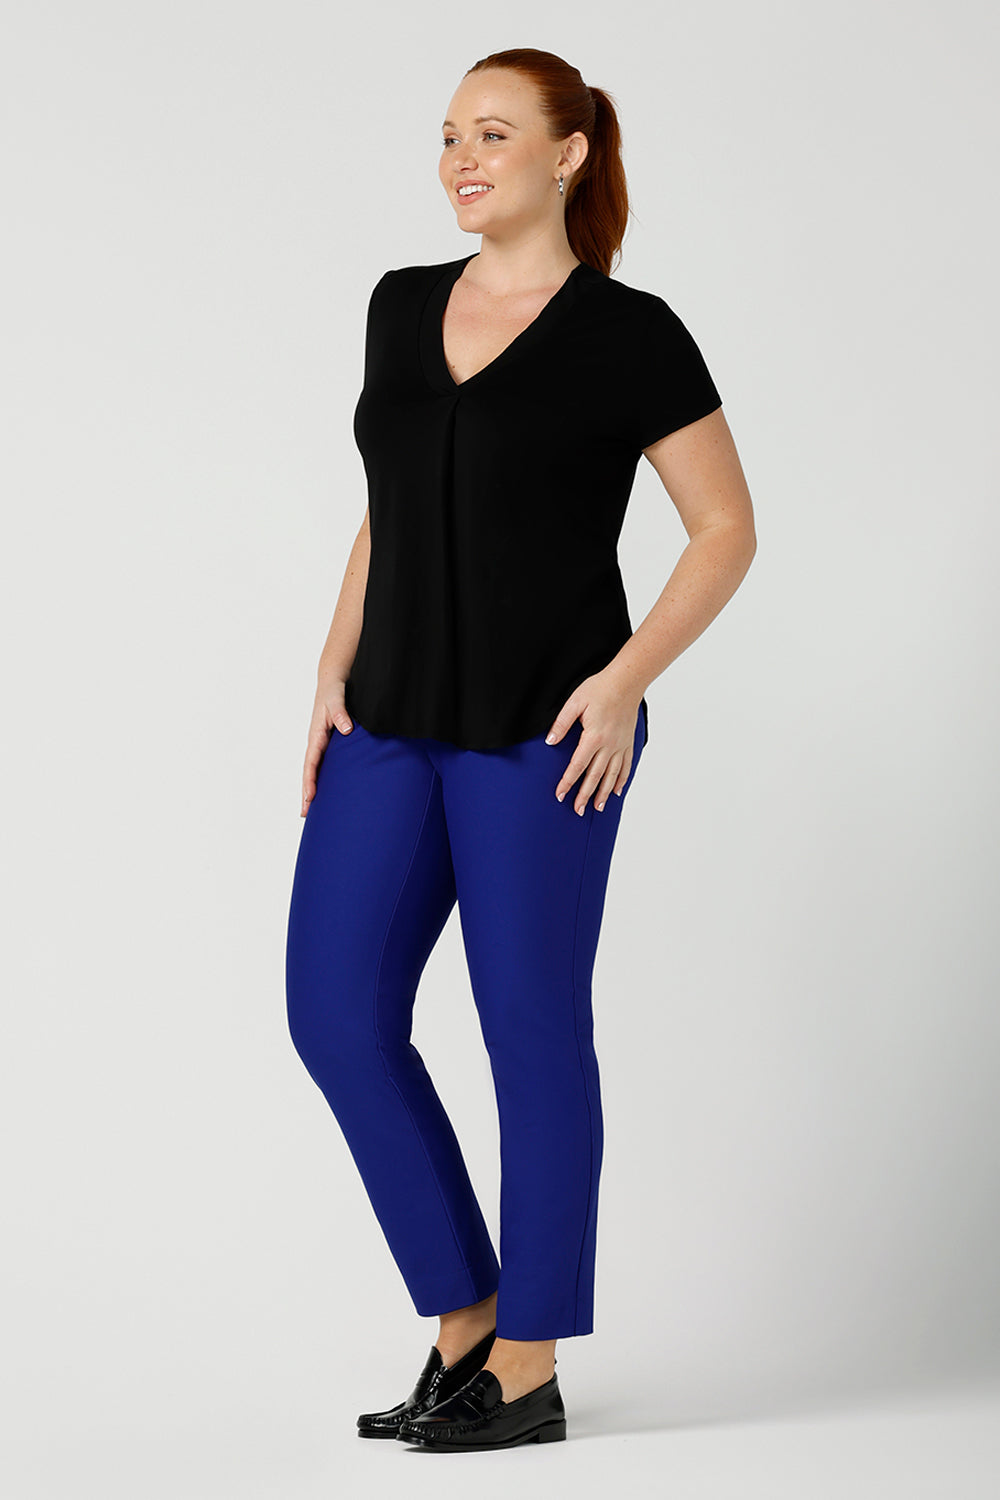 A good top for your capsule wardrobe, this V-neck black bamboo jersey top with short sleeves makes for a good office wear top for women, as well as a comfortable casual top. Worn with cobalt blue, tailored trousers and shown on a size 12 woman, this top is made for fuller figure women by Australian women's clothing brand, Leina & Fleur. Shop black tops for women in sizes 8 to 24 in their online fashion boutique.